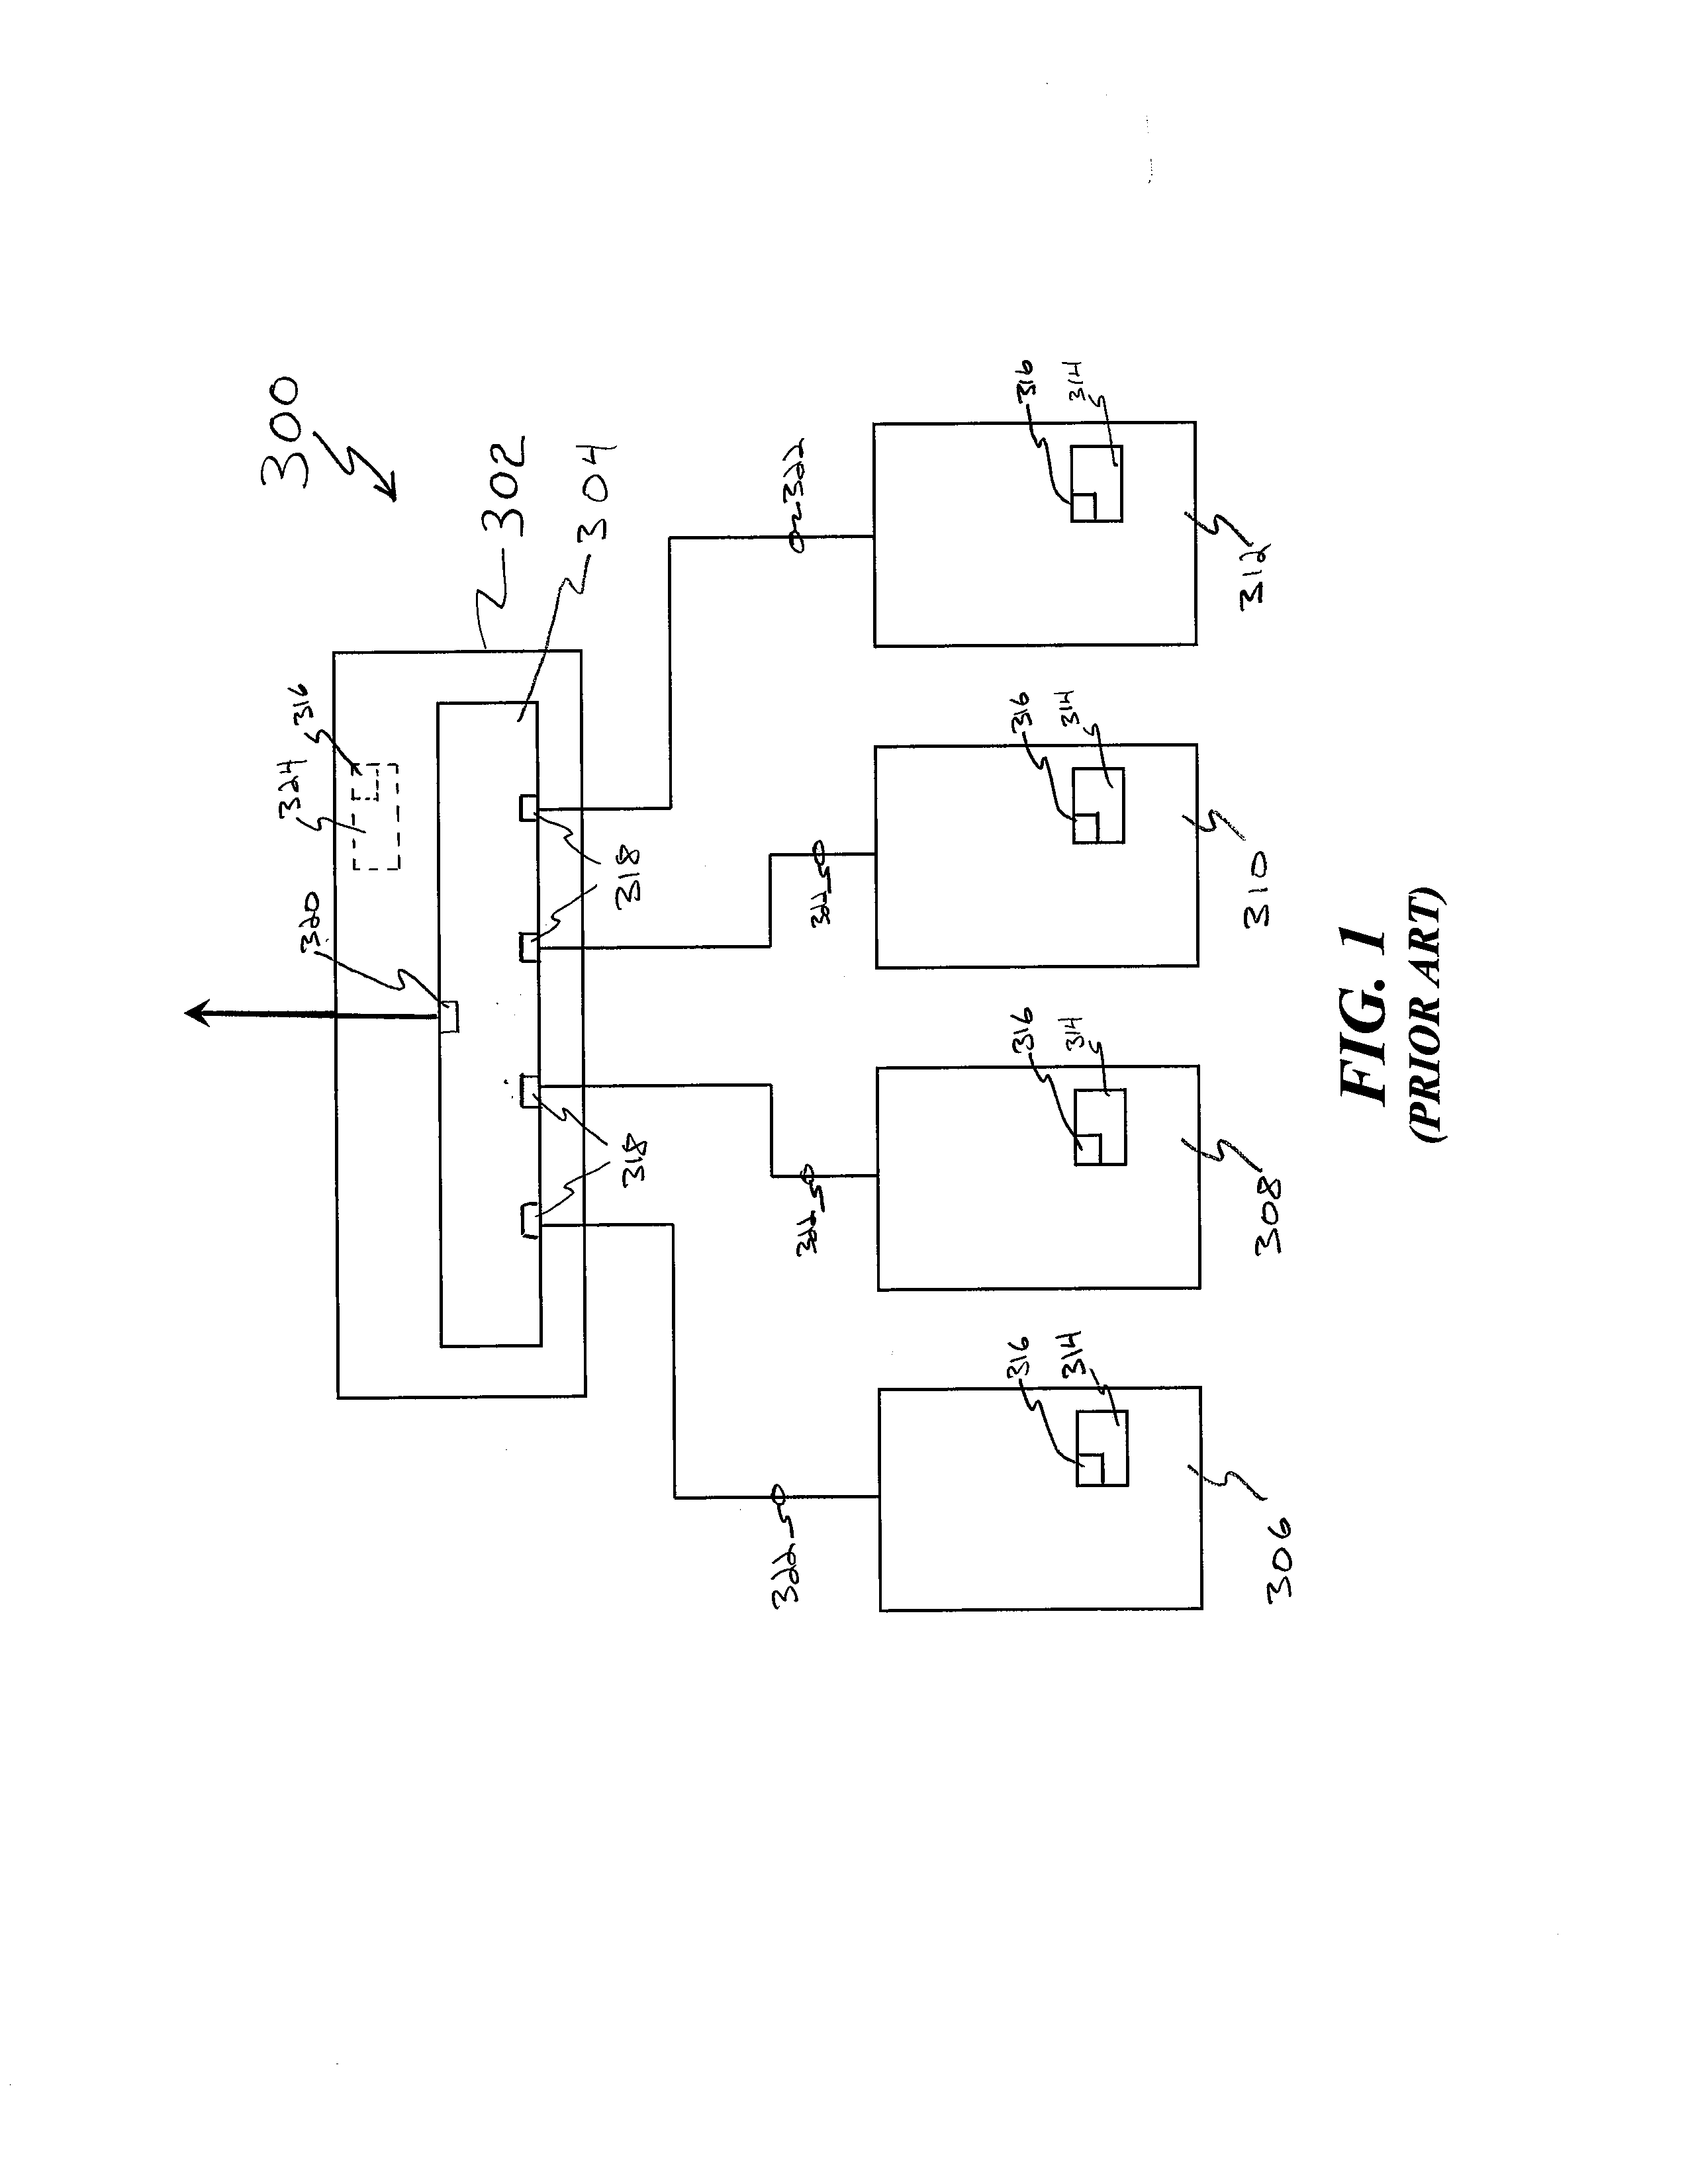 Method and apparatus for reflective memory